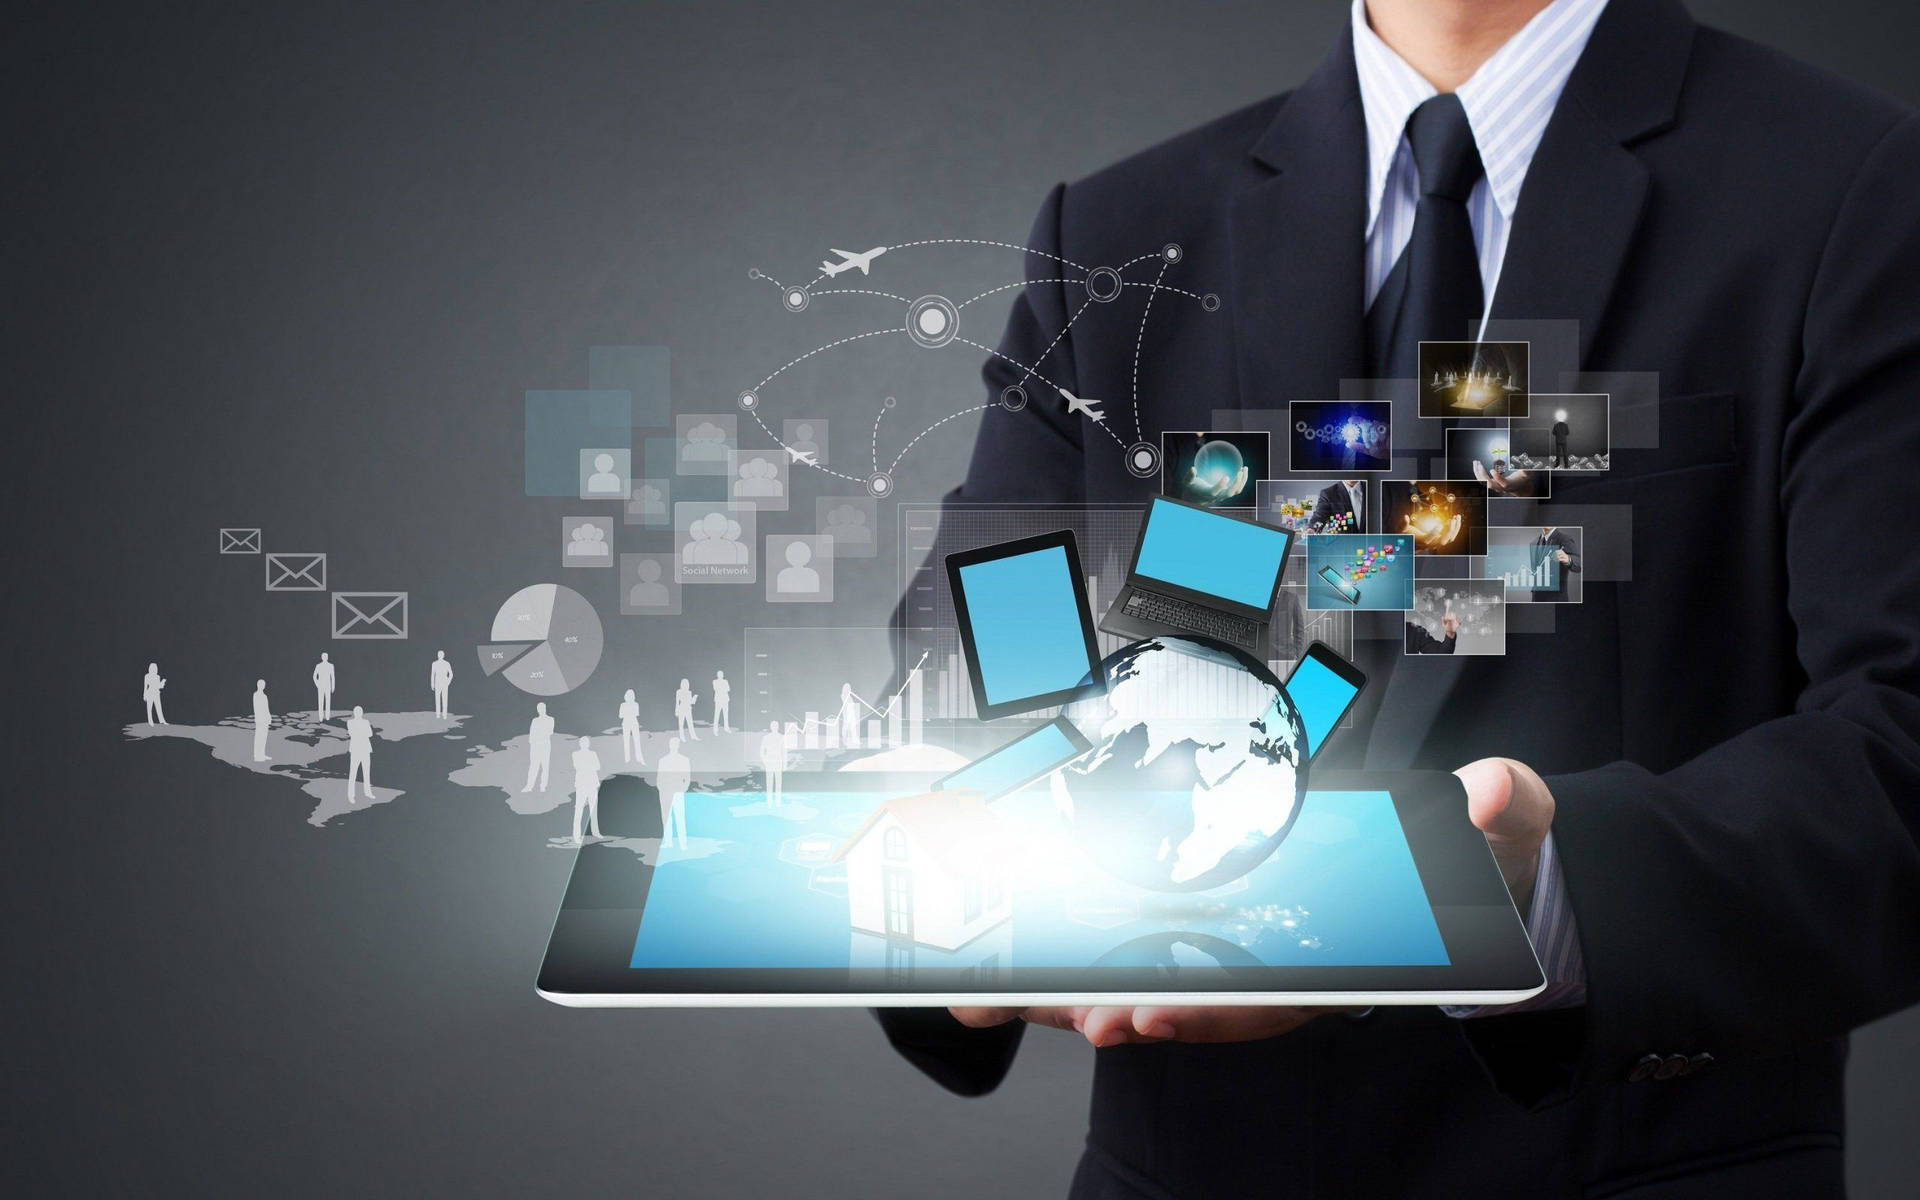 Man In Suit Doing Technology Presentation wallpaper